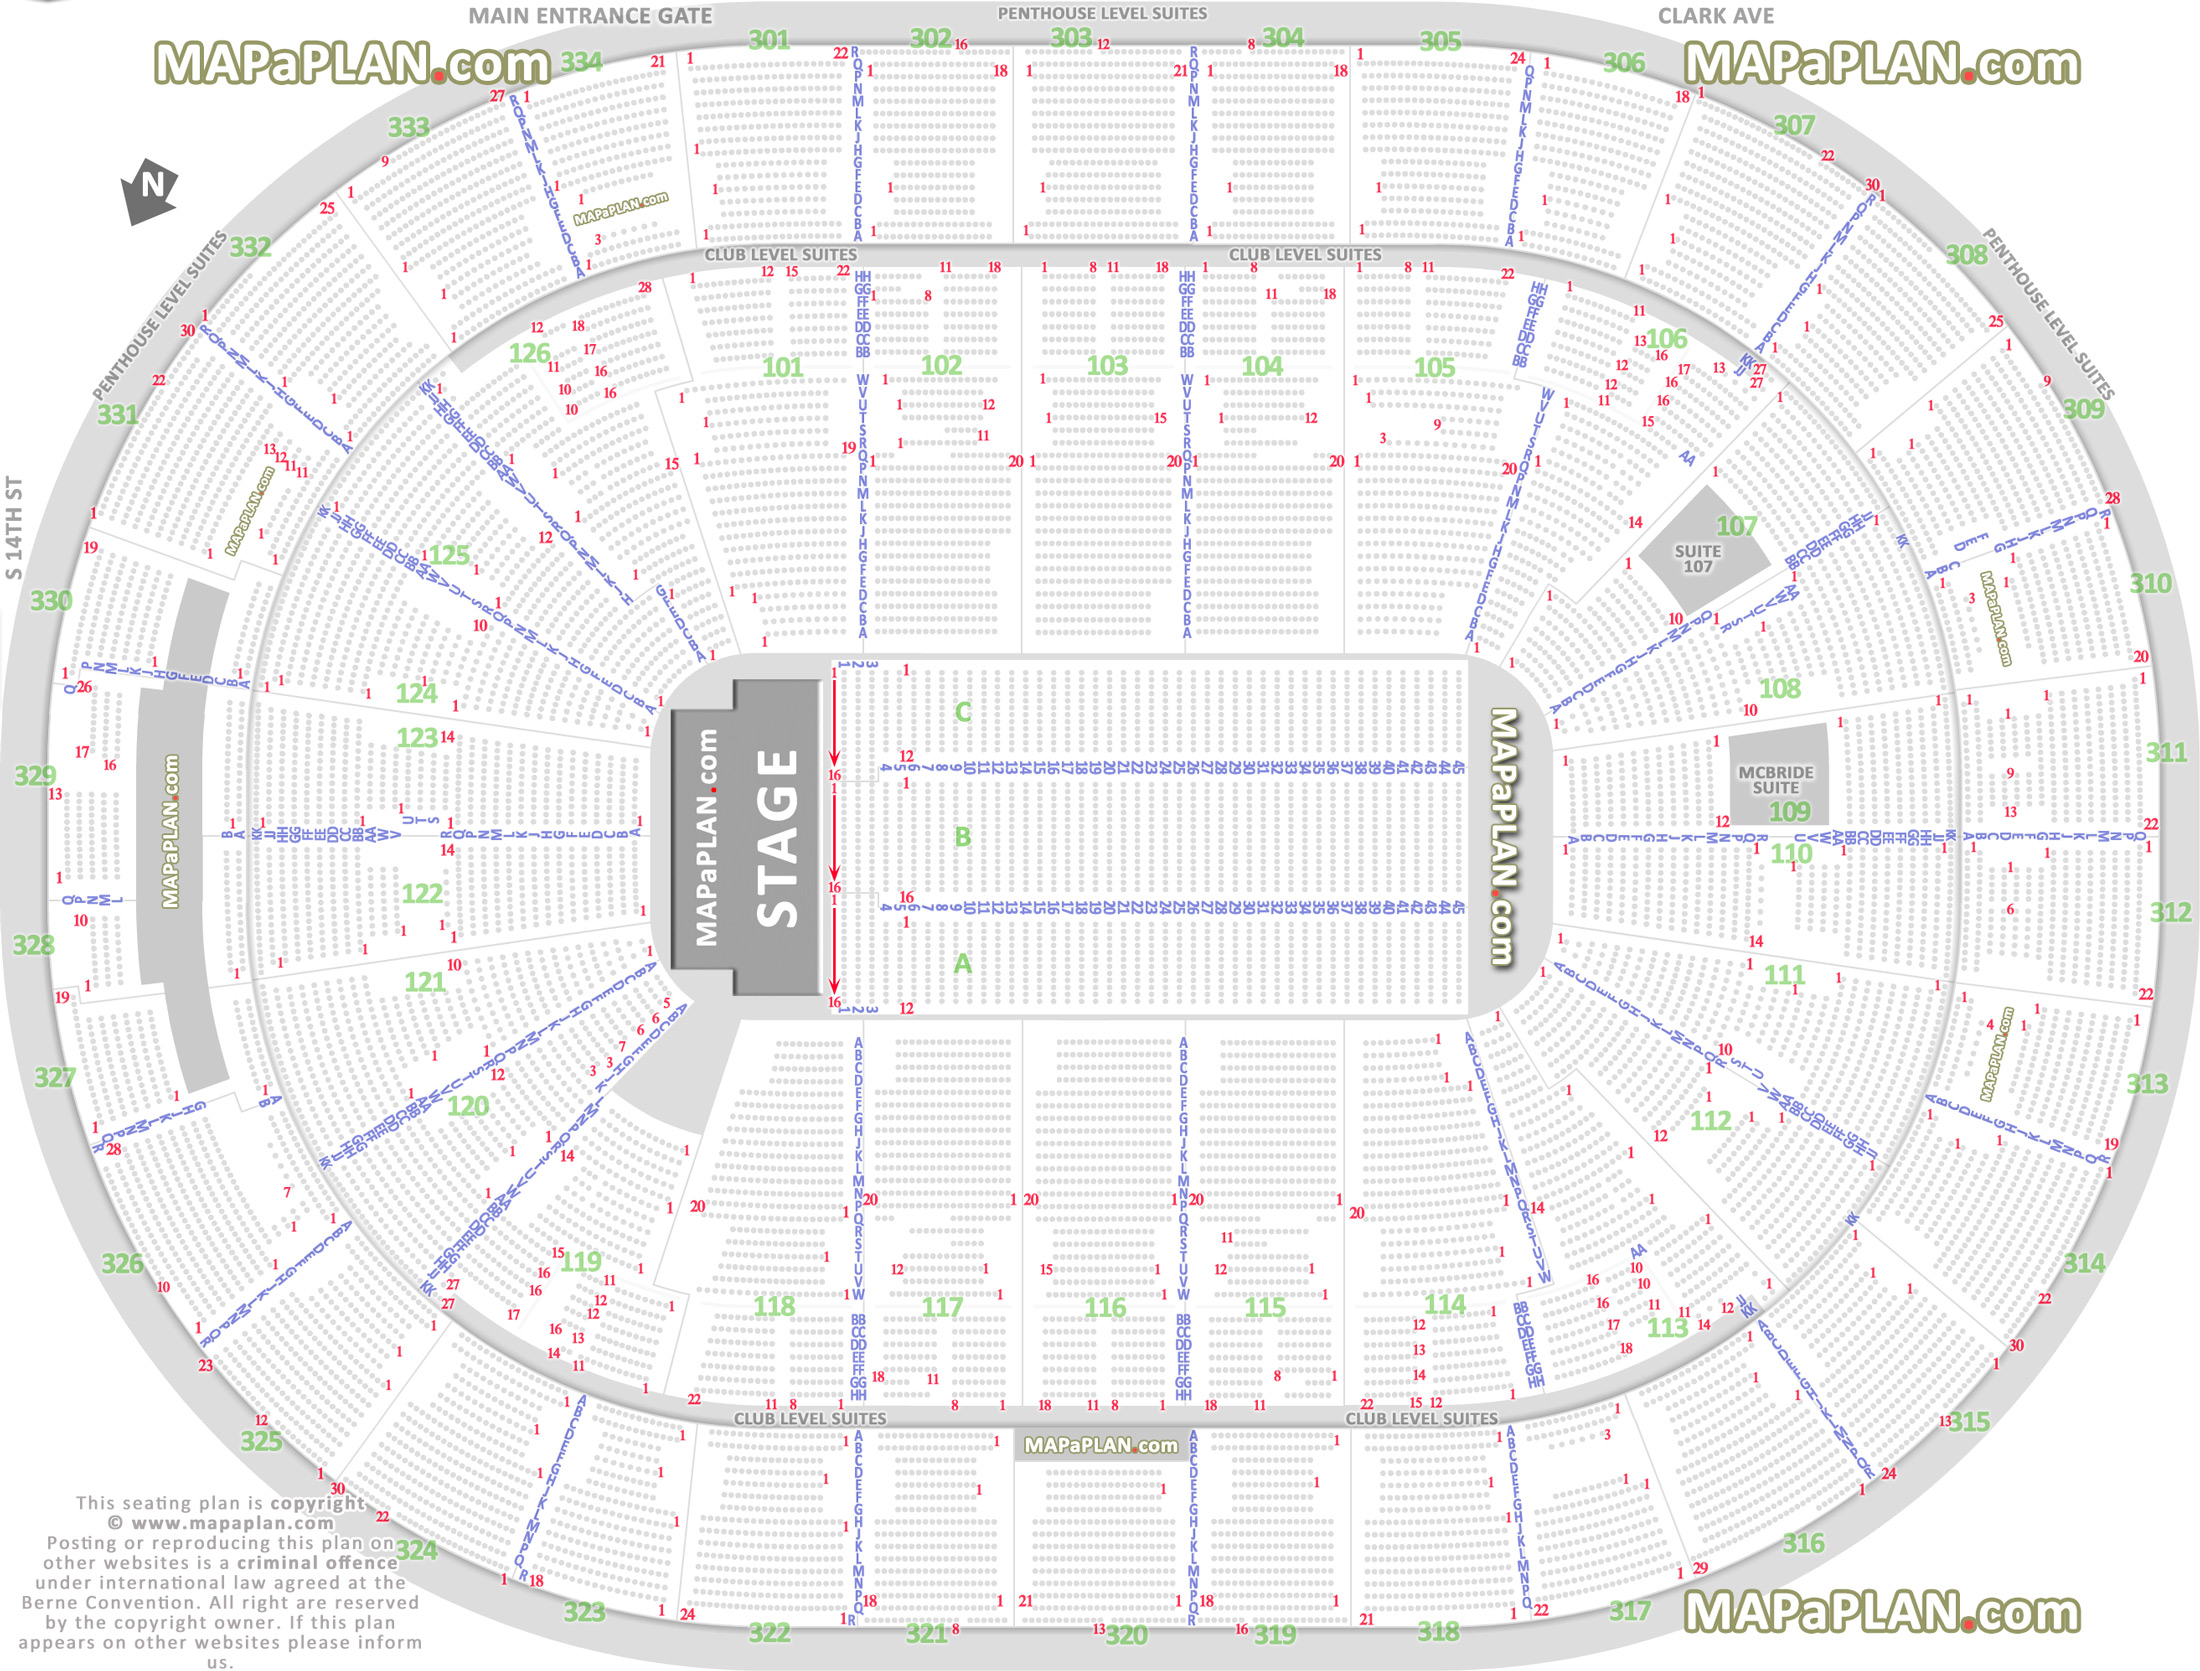 detailed seat row numbers end stage concert sections floor plan map arena plaza club mezzanine level layout St. Louis Scottrade Center seating chart